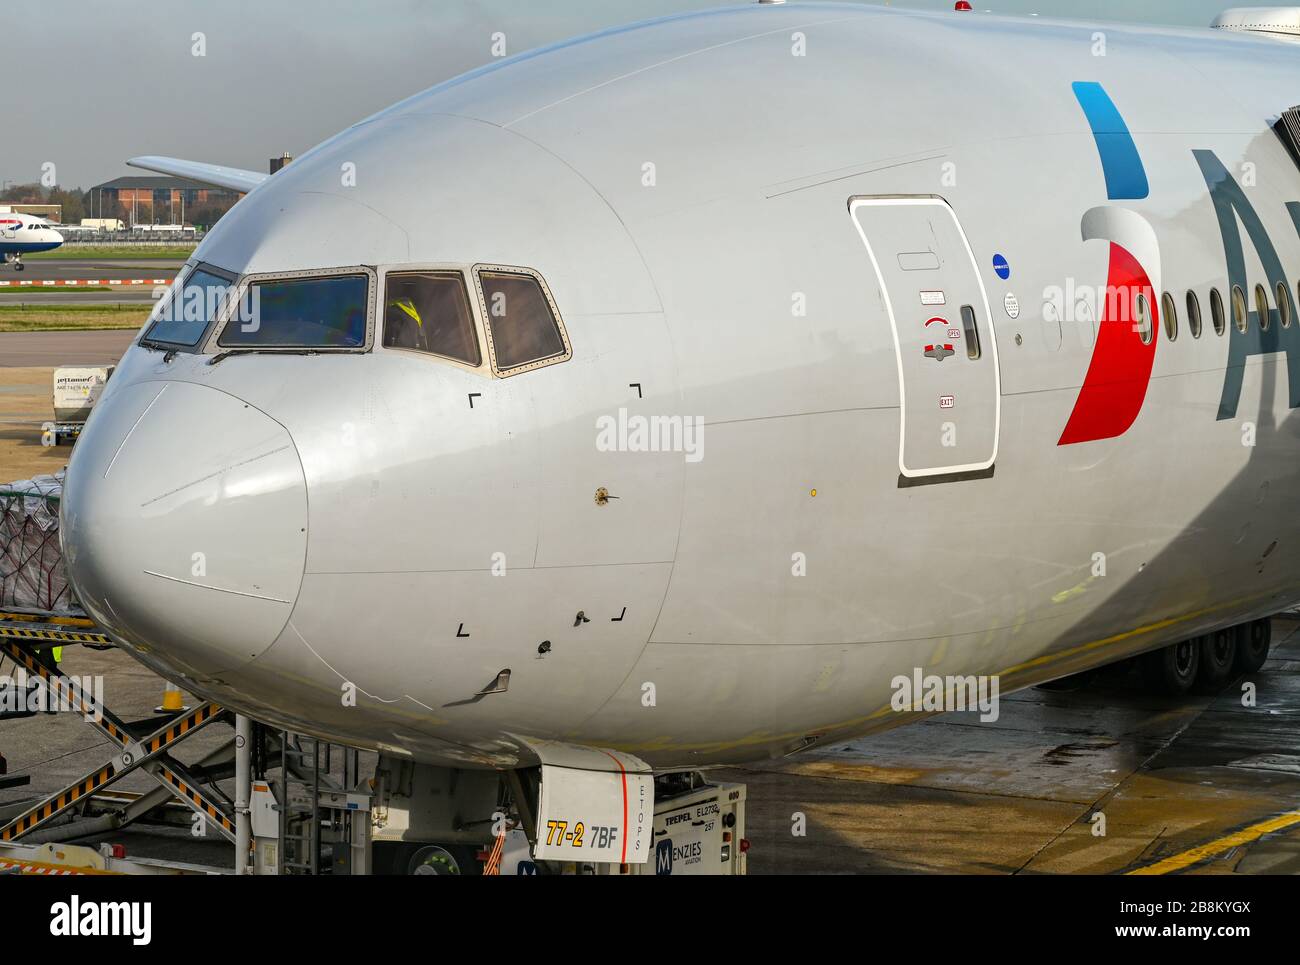 LONDON, ENGLAND - NOVEMBER 2018: Close up of the nose of an American Airlines Boeing 777 long haul airliner at London Heathrow Airport Stock Photo